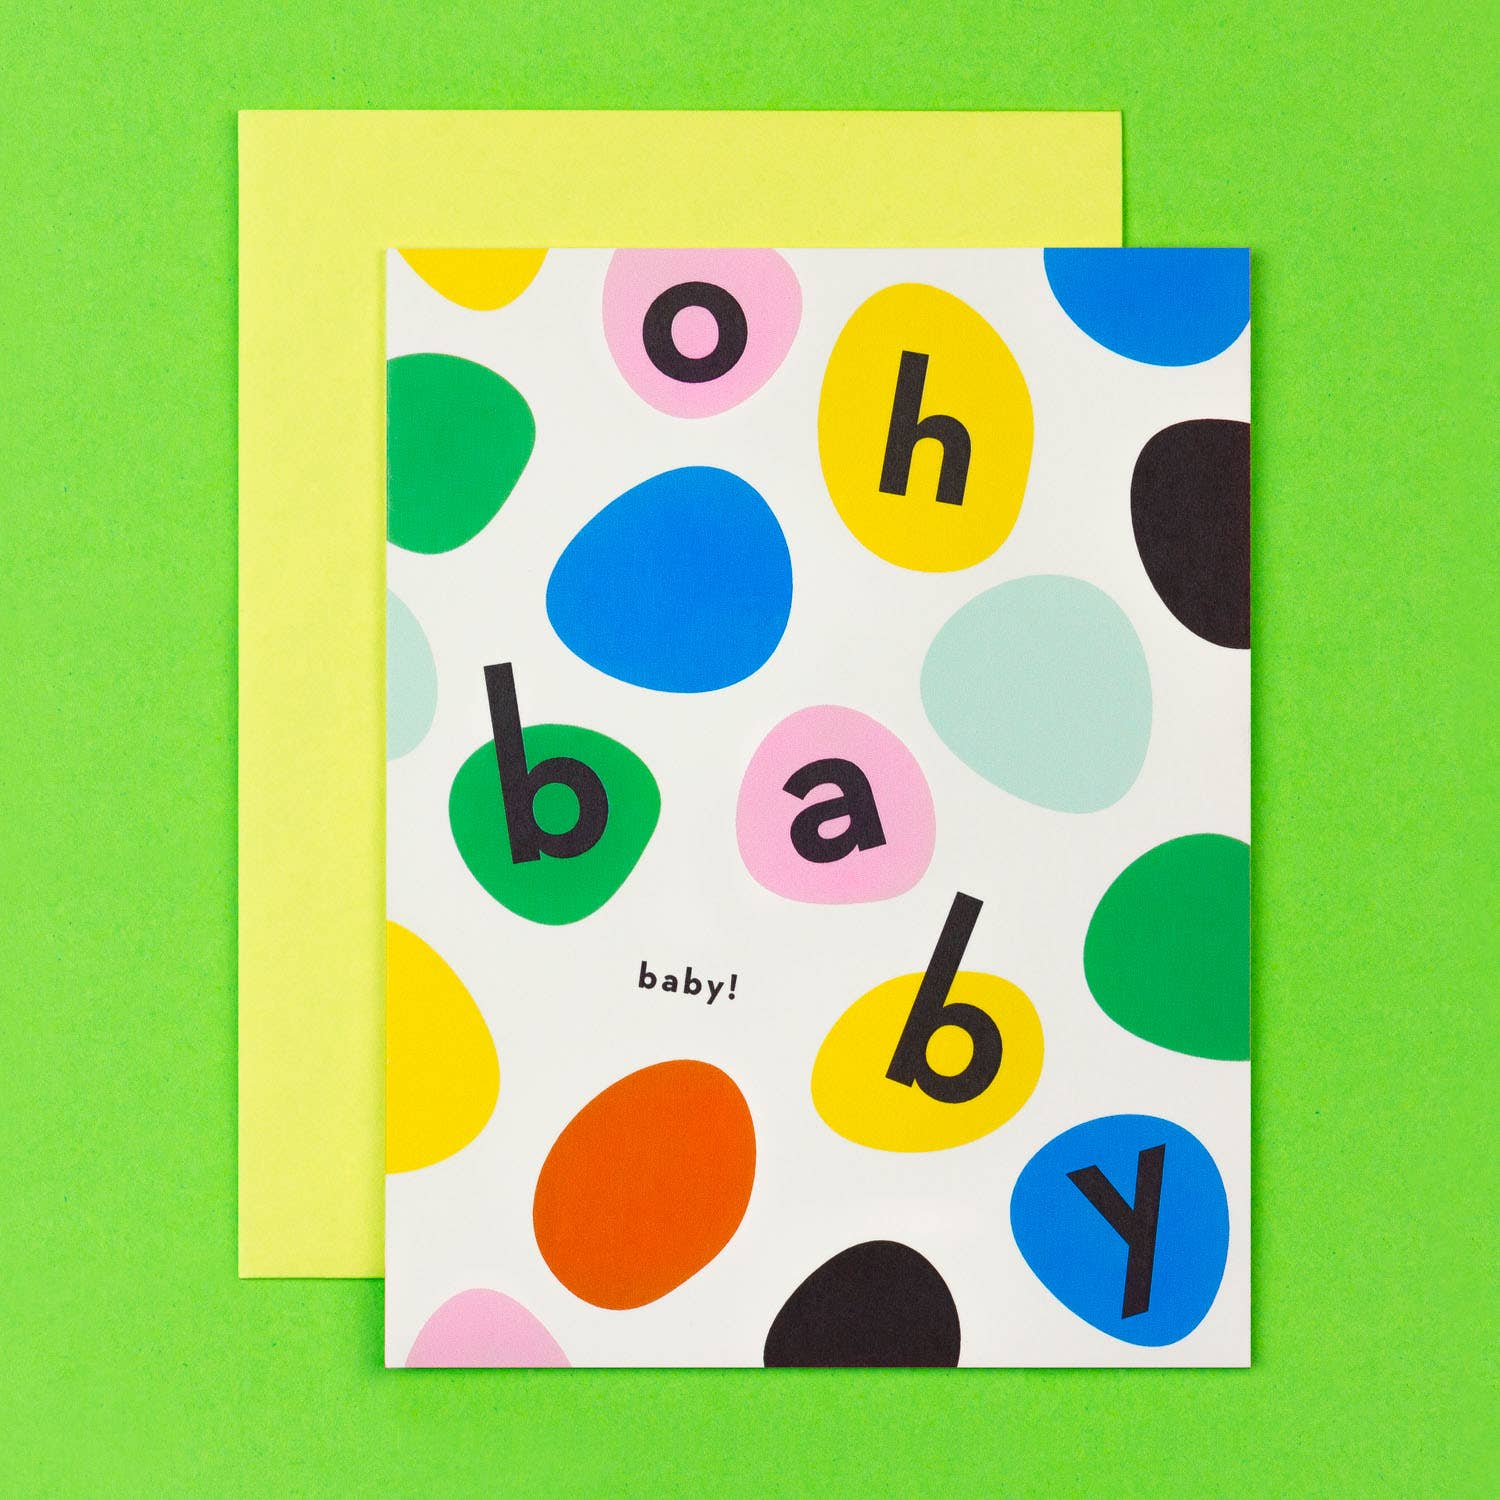 Oh Baby Baby! Dots Card - The Crowd Went Wild